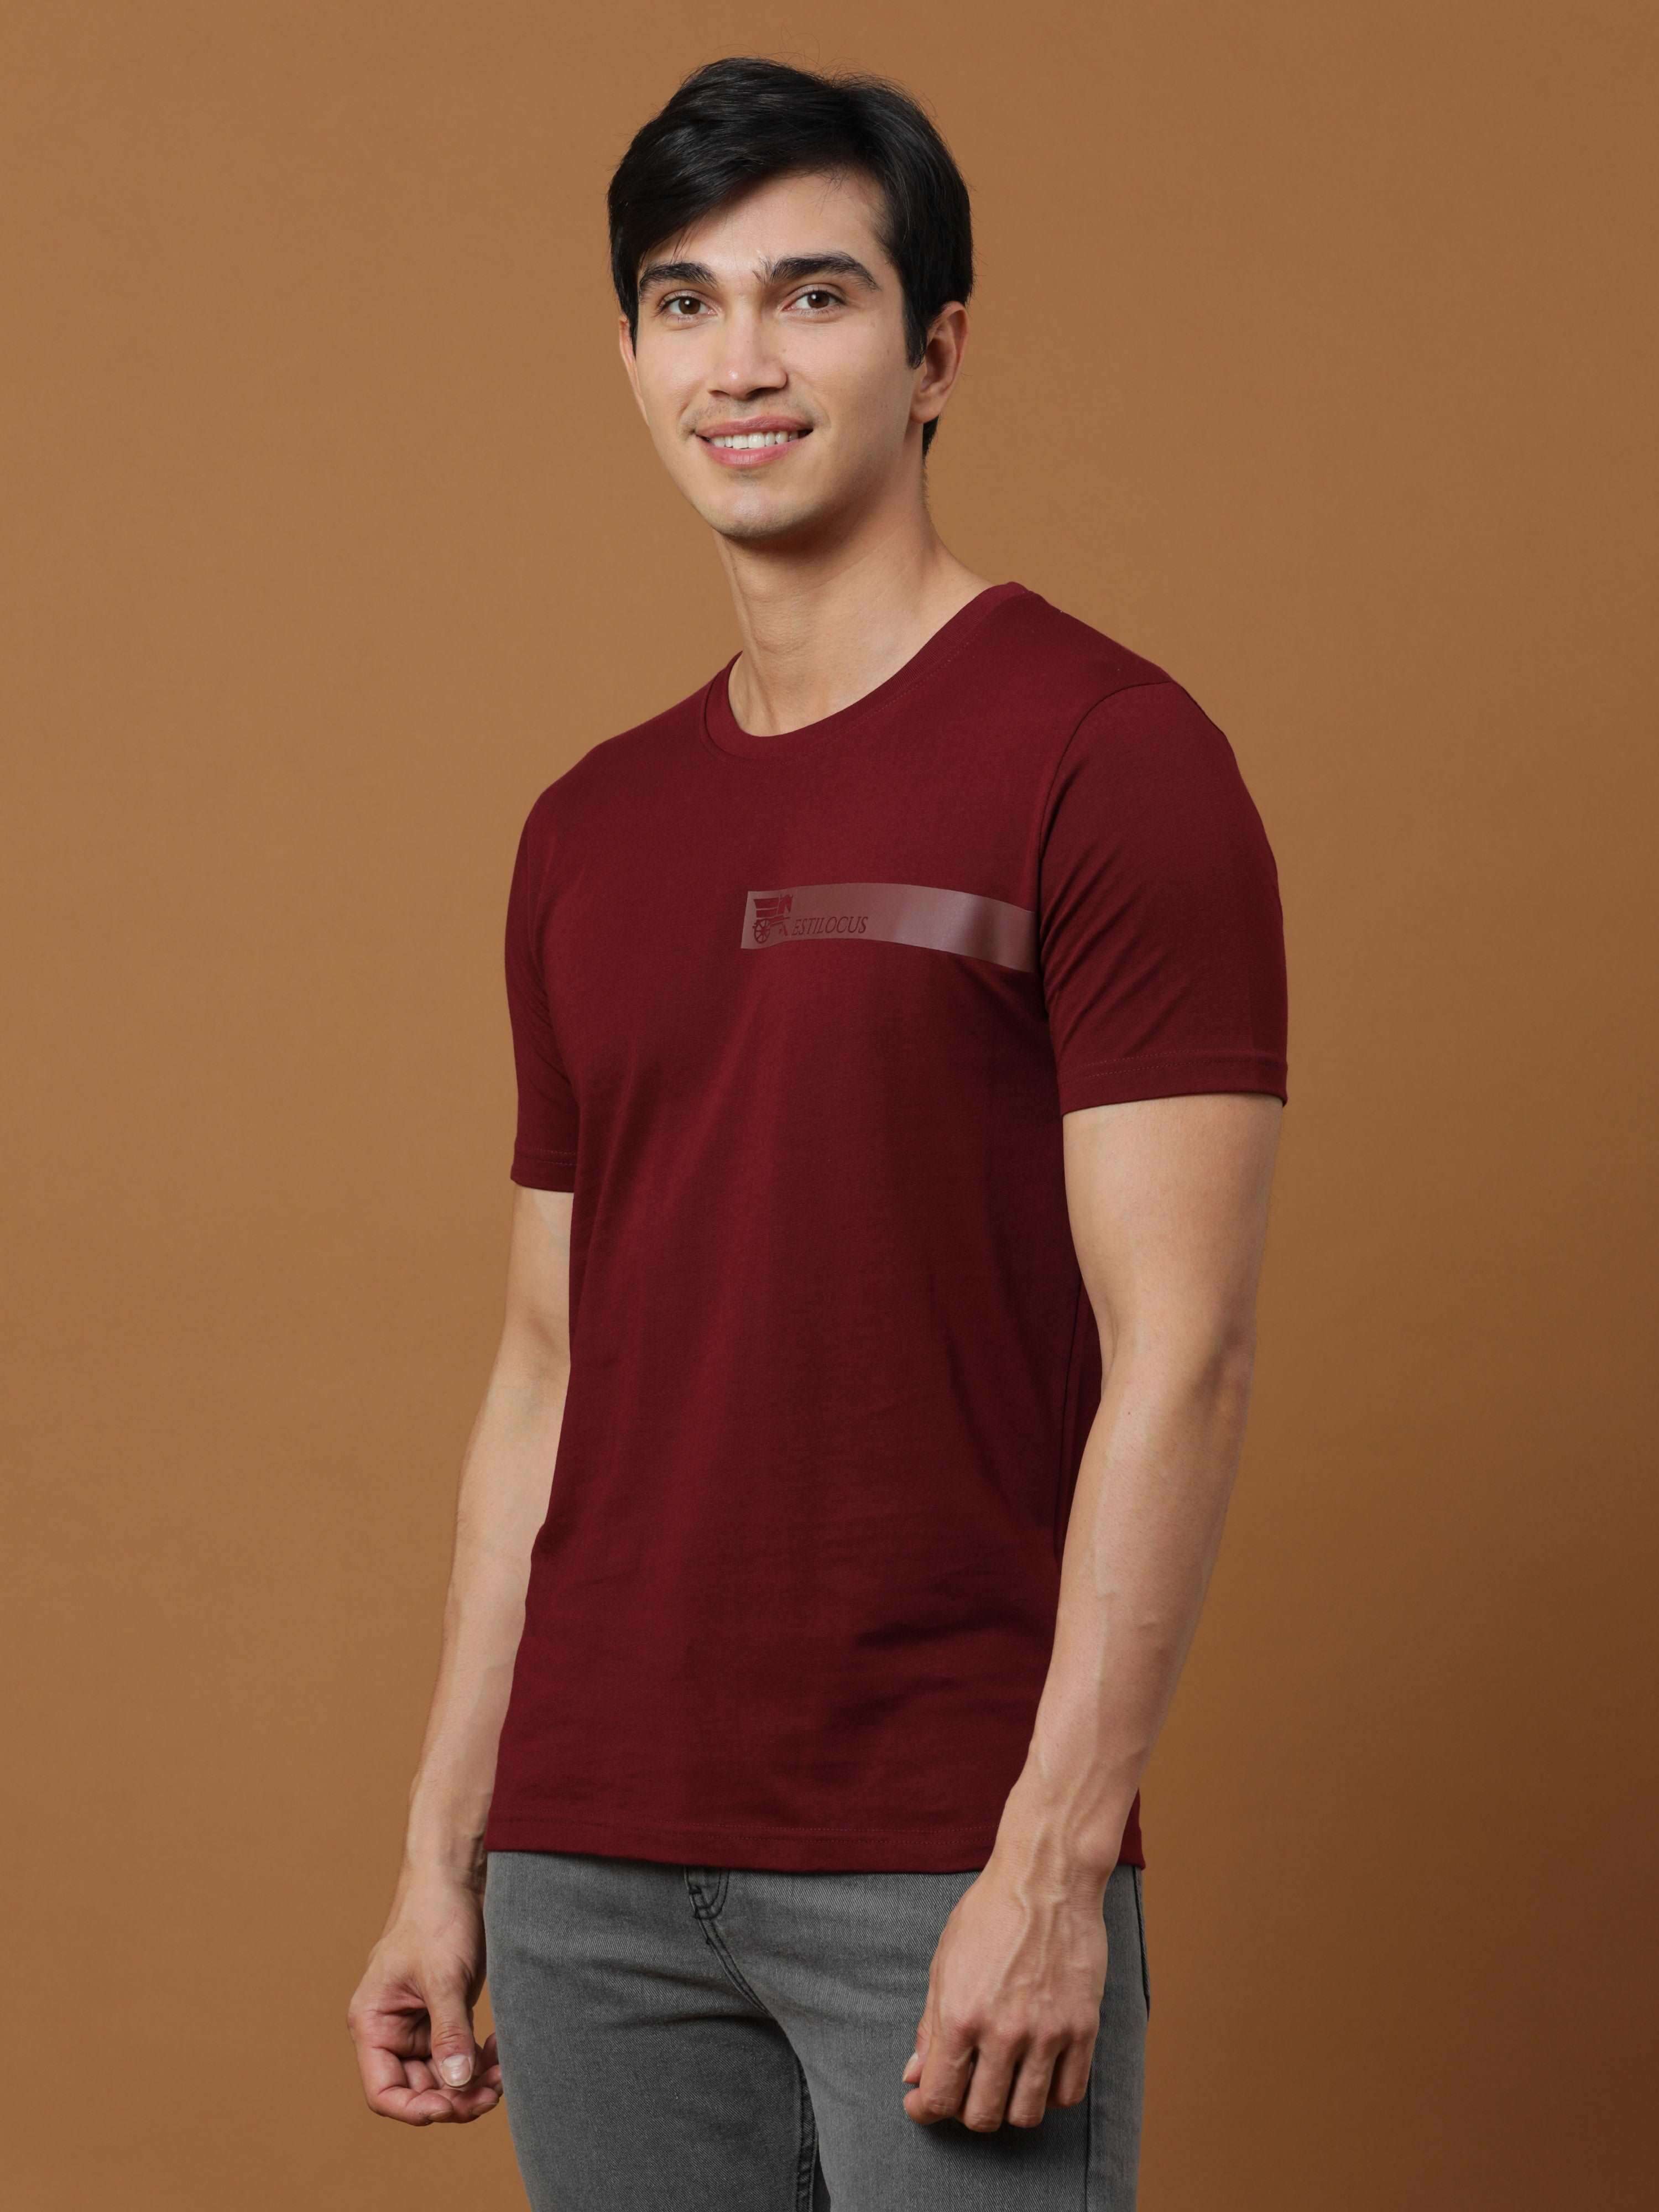 Burgundy Hd Printed Logo T Shirt shop online at Estilocus. 100% Cotton Designed and printed on knitted fabric. The fabric is stretchy and lightweight, with a soft skin feel and no wrinkles. Crew neck collar which is smooth on the neck and keeps you comfor